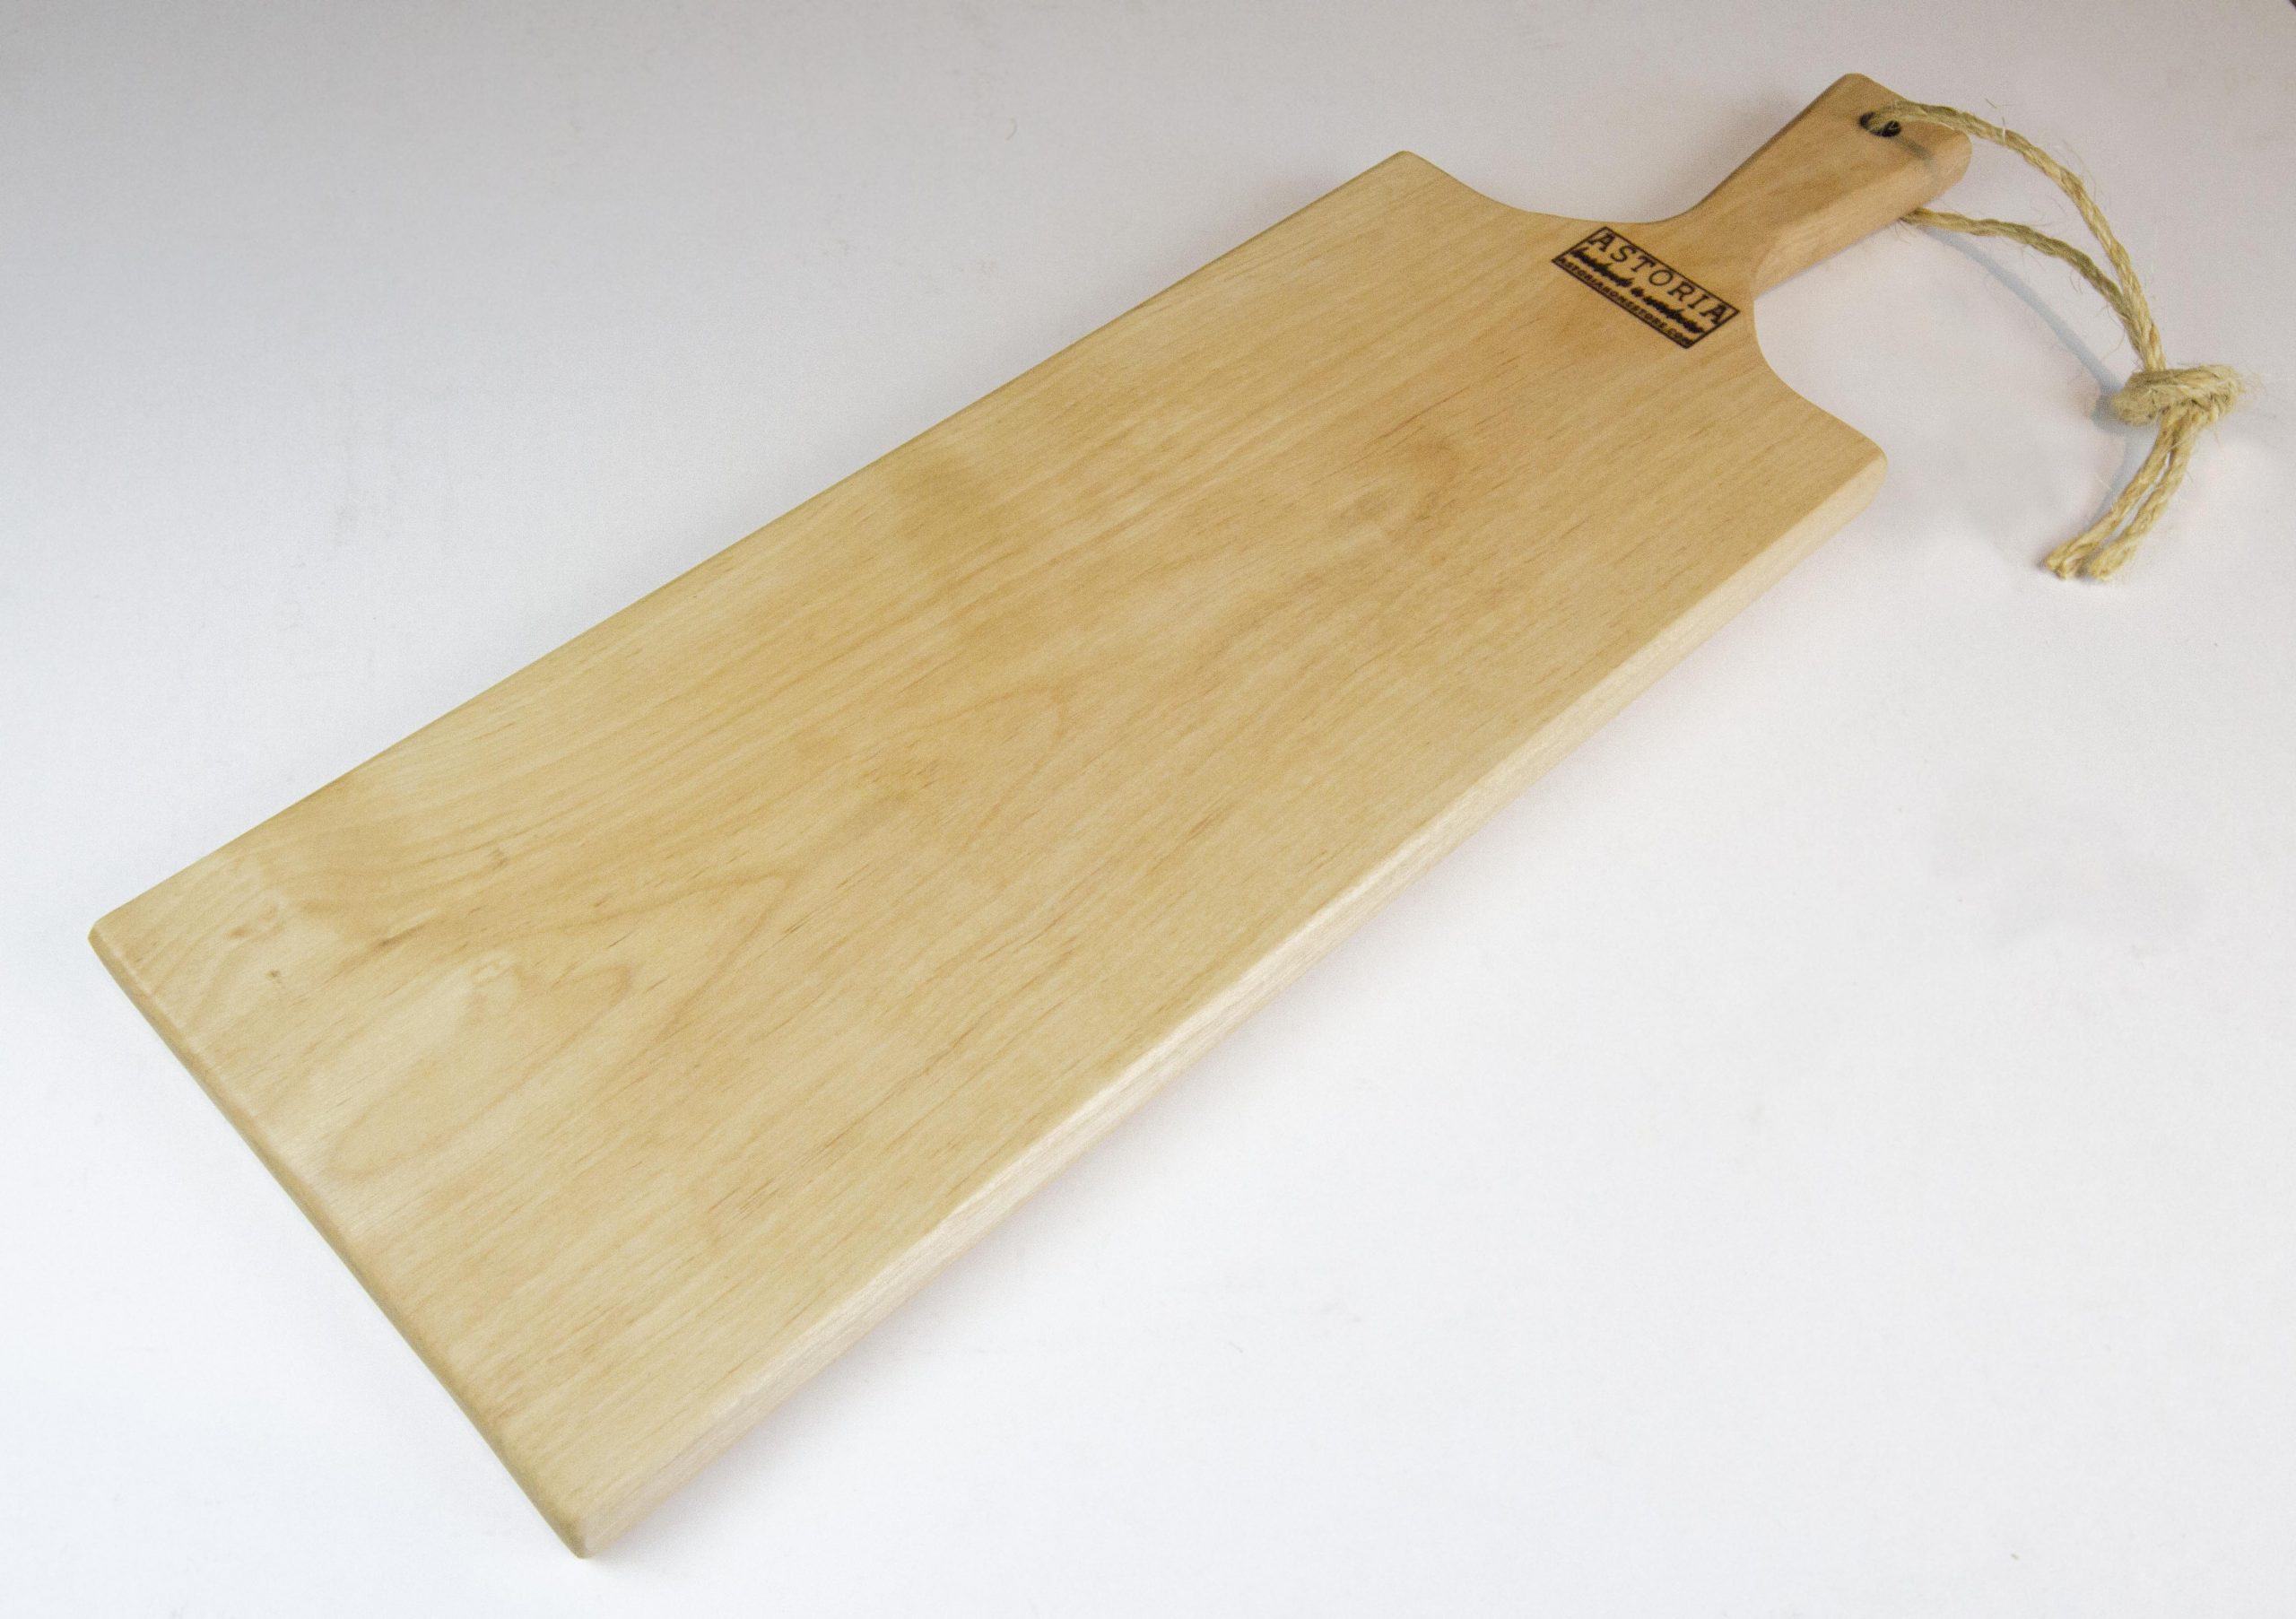 https://www.astoriahomestore.com/wp-content/uploads/2020/02/Birch-Hardwood-Medium-Long-Charcuterie-Board-Hand-Crafted-in-Mendocino-Village-Wood-Paddle-Cutting-Board-Jute-Twine-Handle-Side-Profile-scaled.jpg